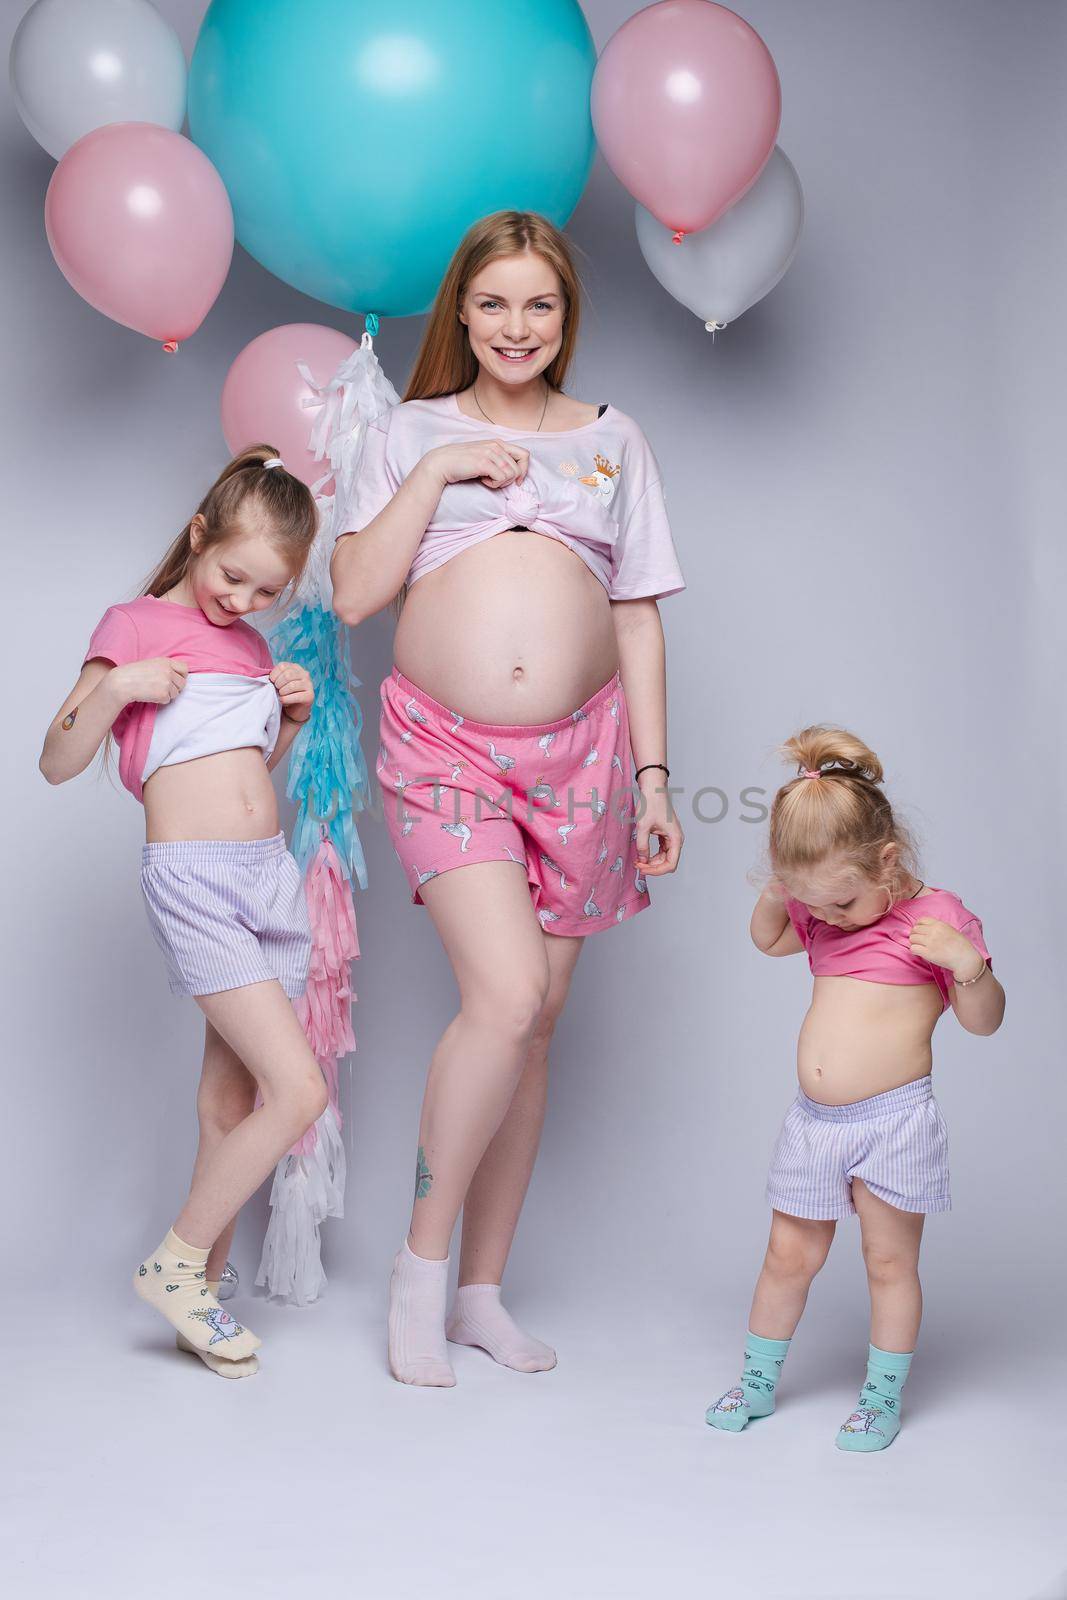 Stunning pregnant woman showing her belly. Her two daughters looking at their tummy too. They all wearing pyjamas. Studio portrait of mother and two daughters demonstrating bellies.